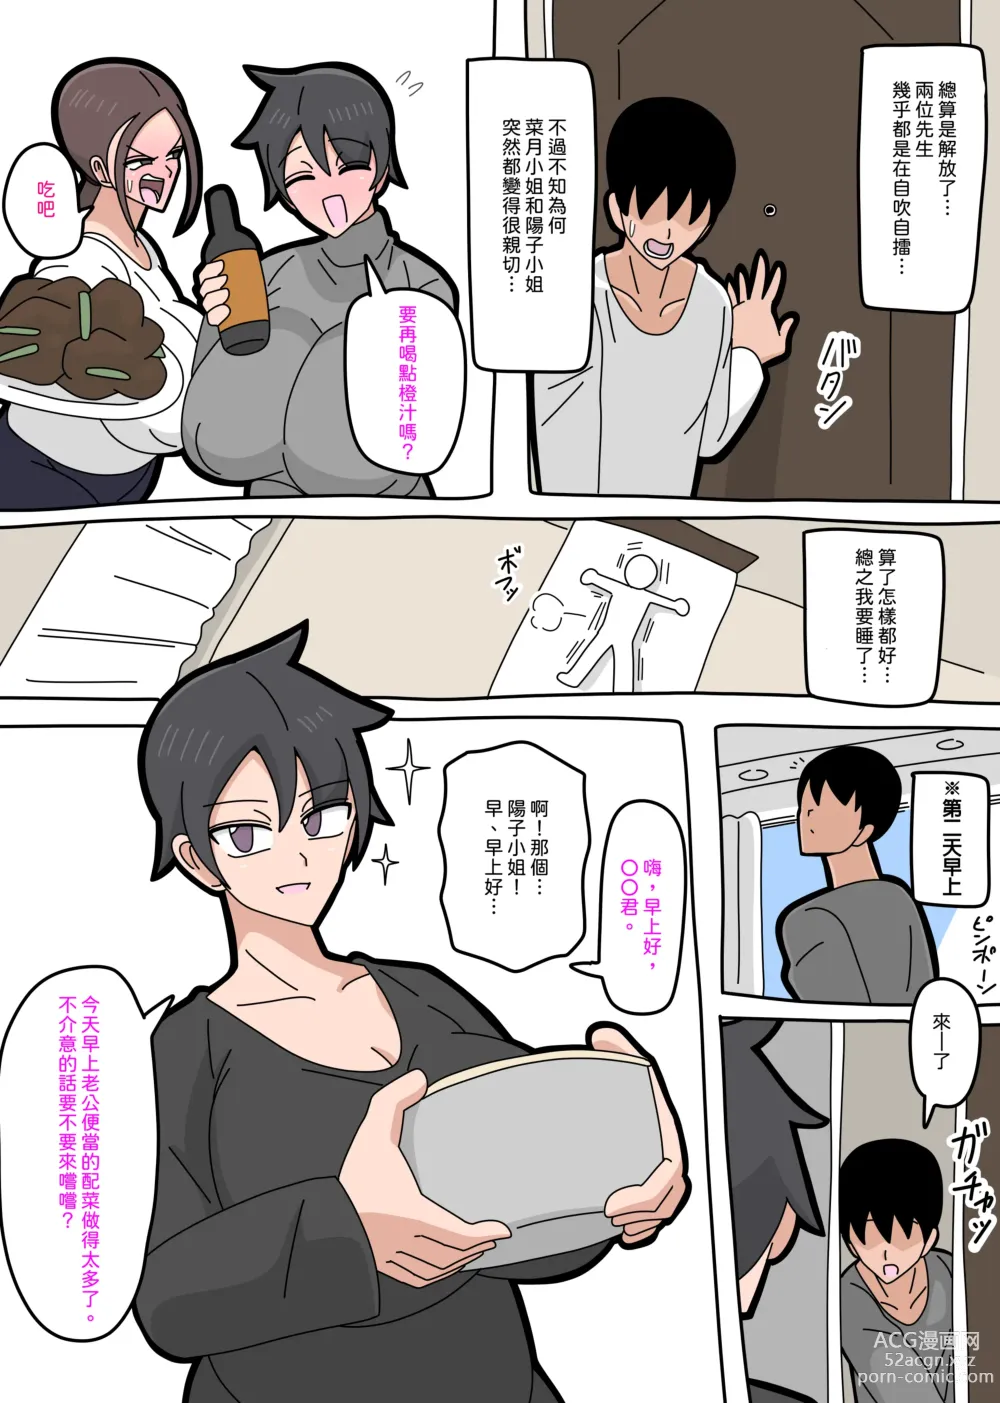 Page 7 of doujinshi 強勢人妻